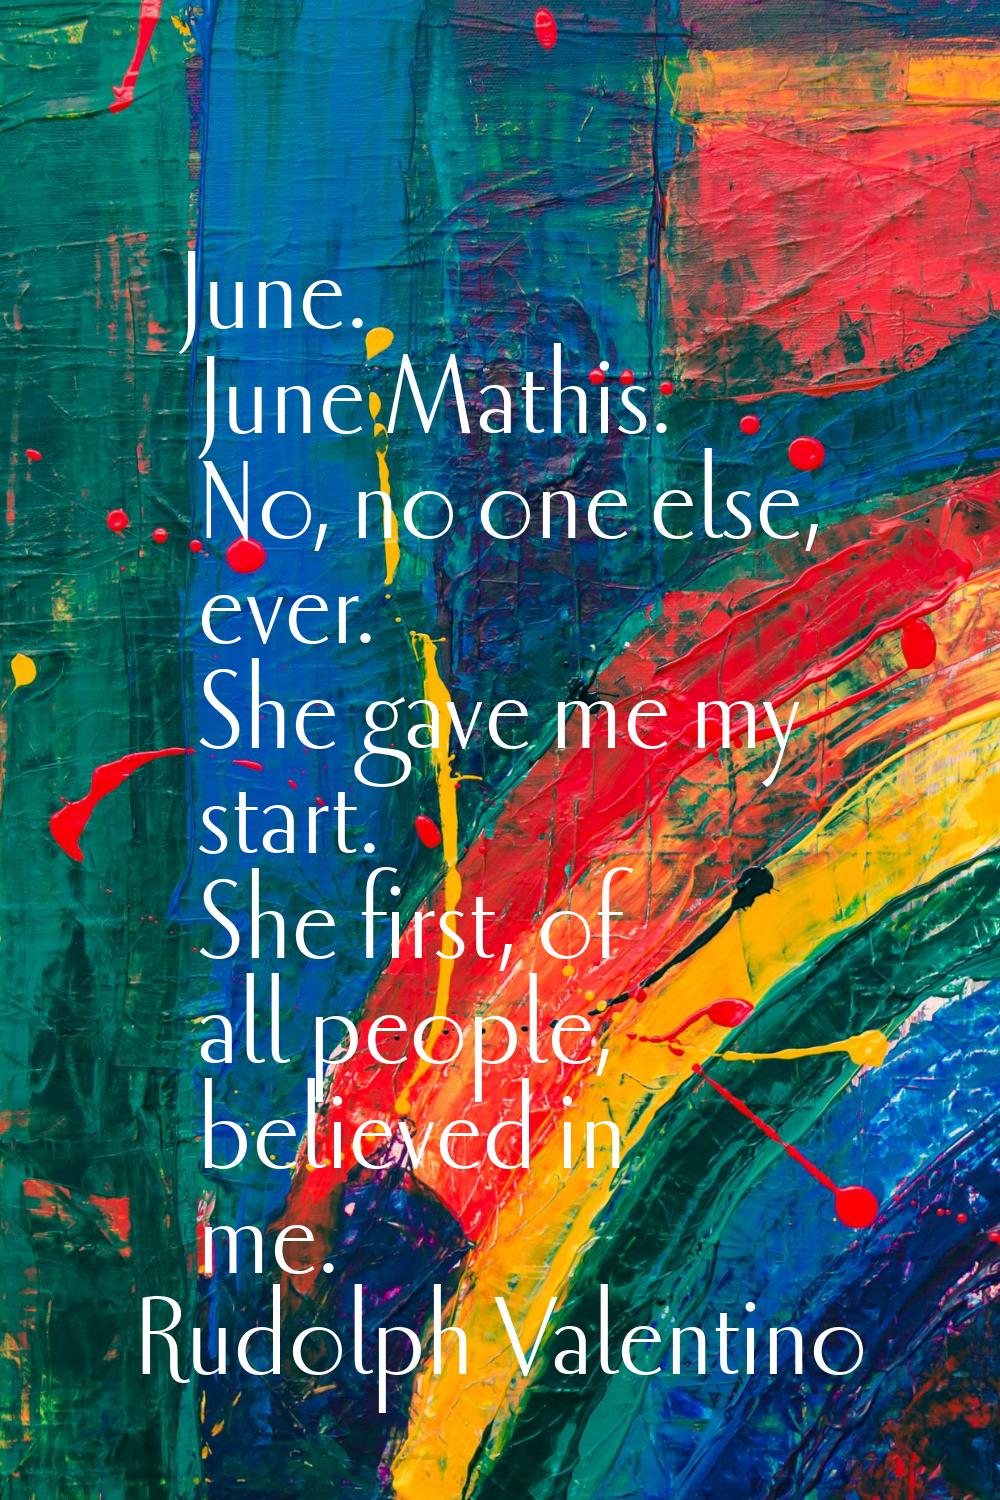 June. June Mathis. No, no one else, ever. She gave me my start. She first, of all people, believed 